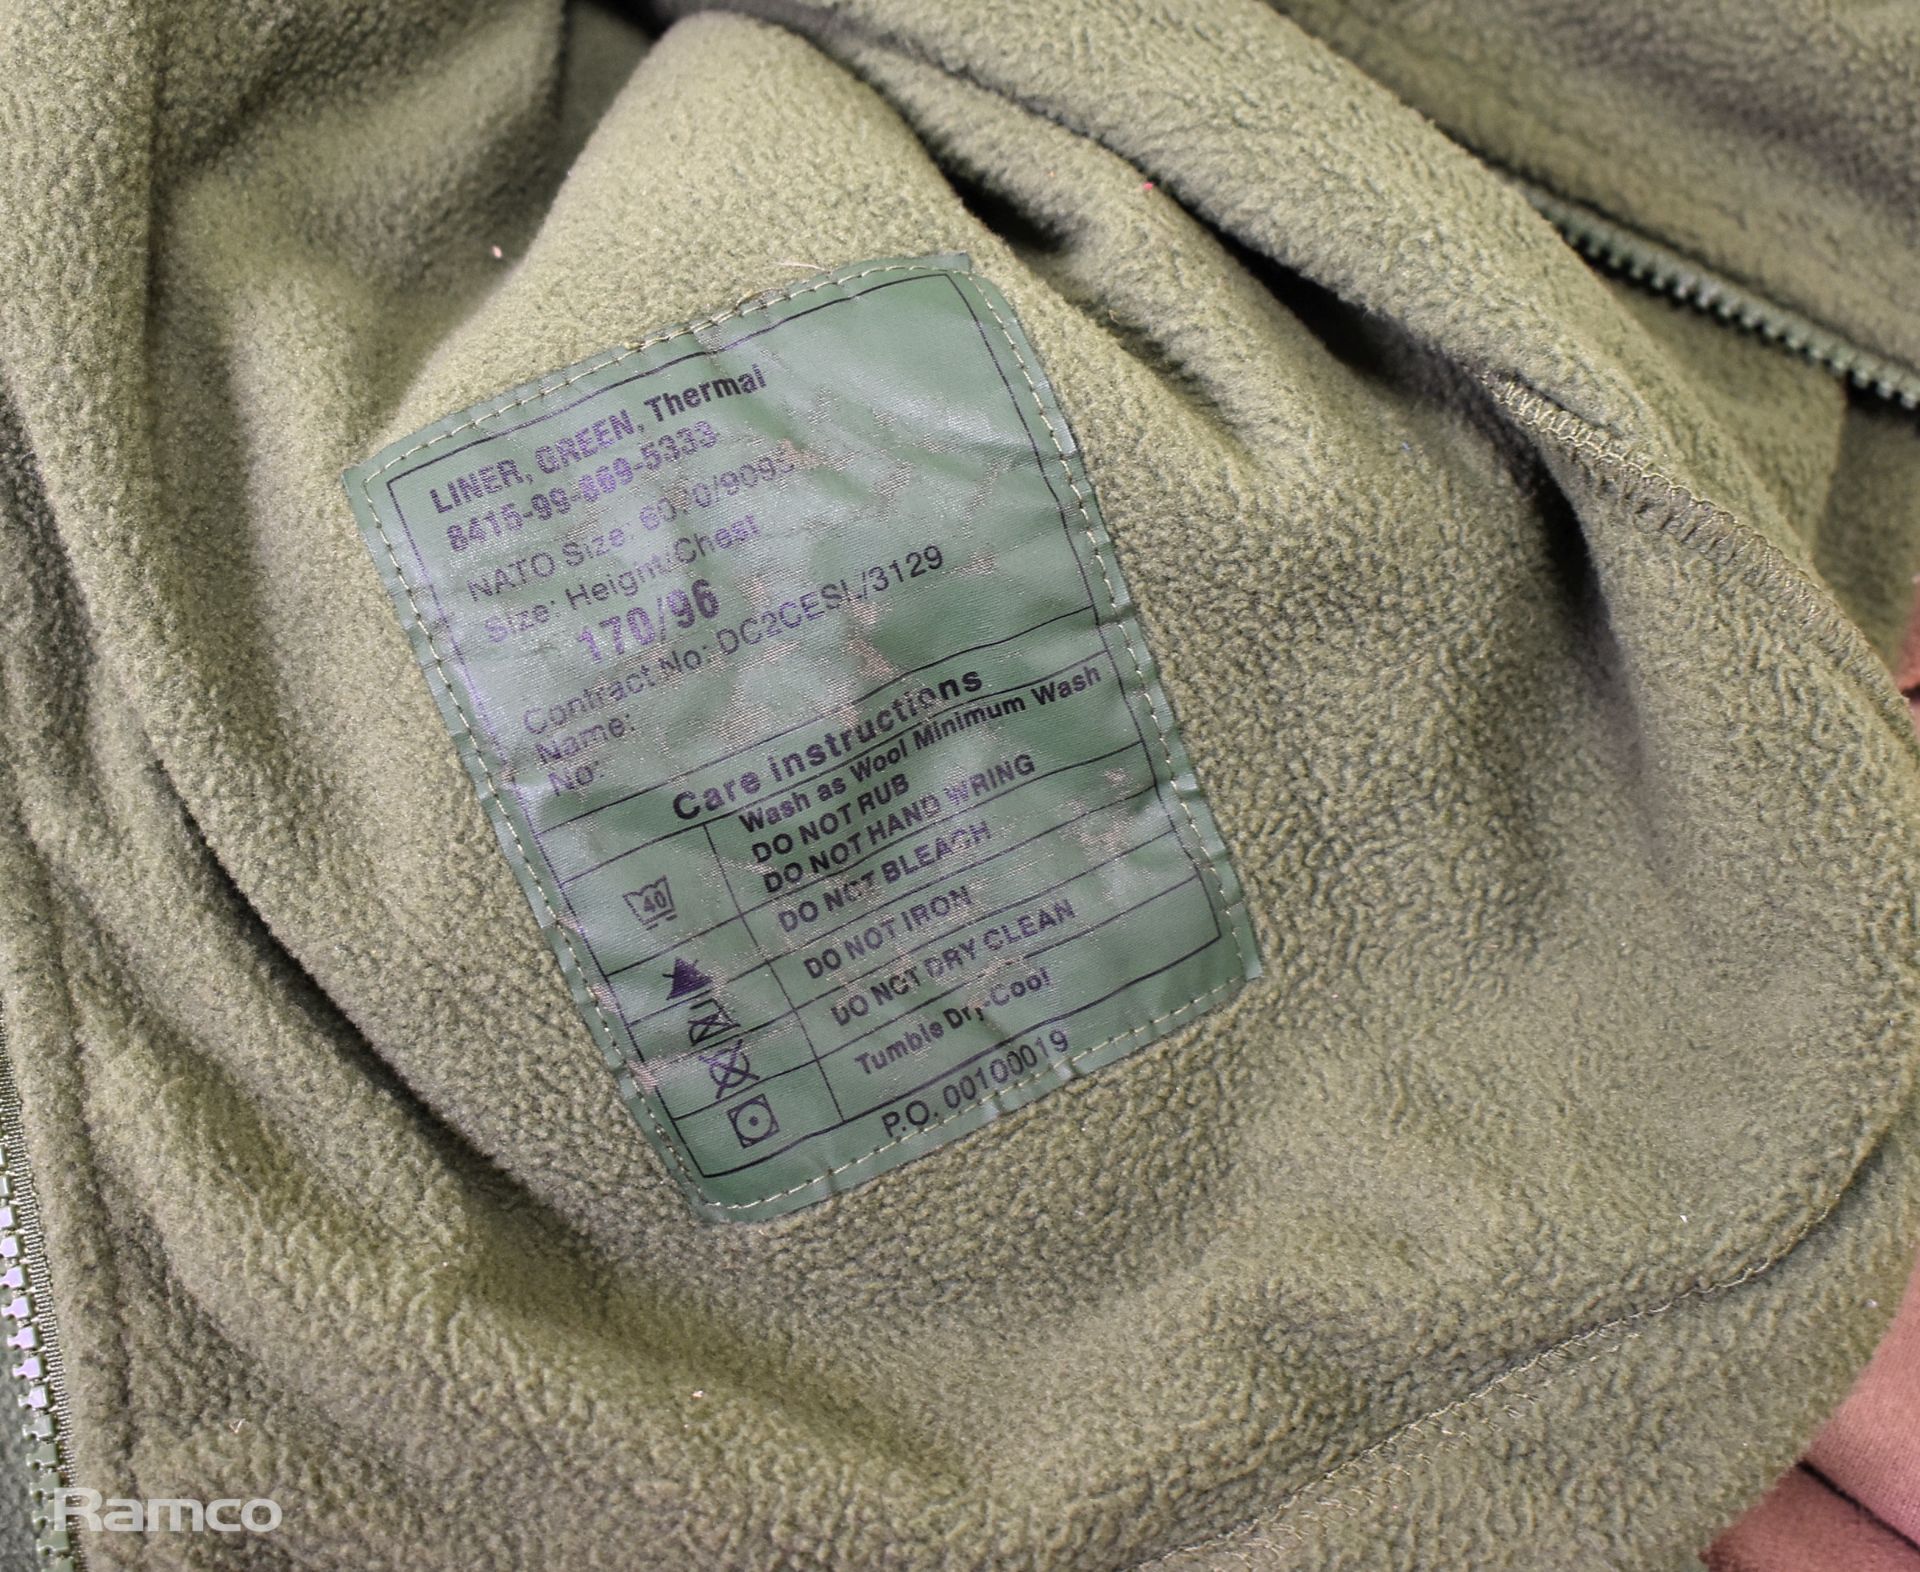 100x British Army Combat thermal undershirts - mixed colours - mixed grades and sizes - Image 8 of 13